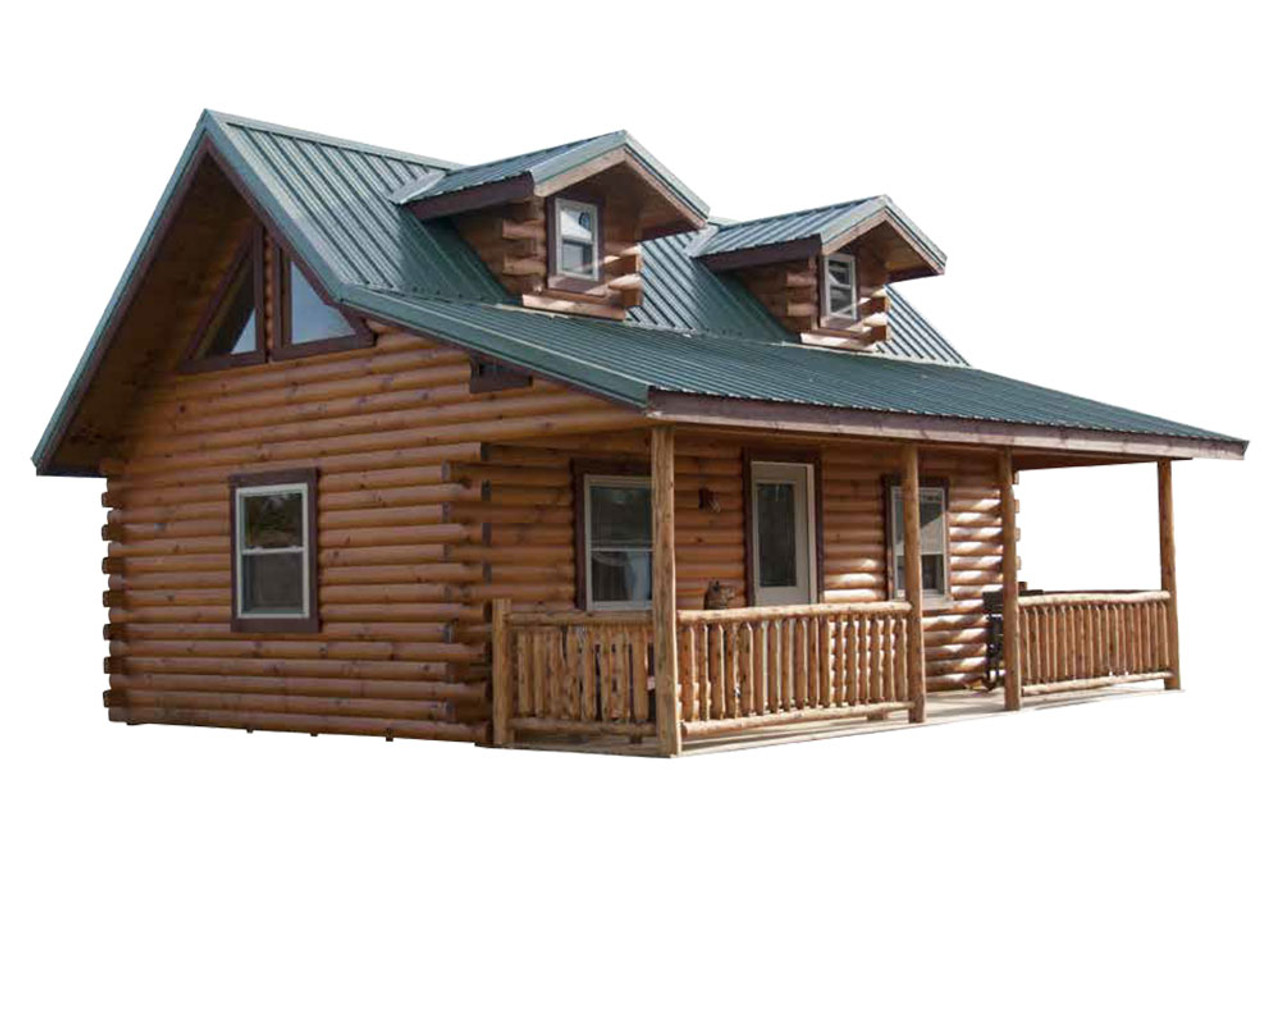 Cabins for Sale - Pioneer Log Cabins